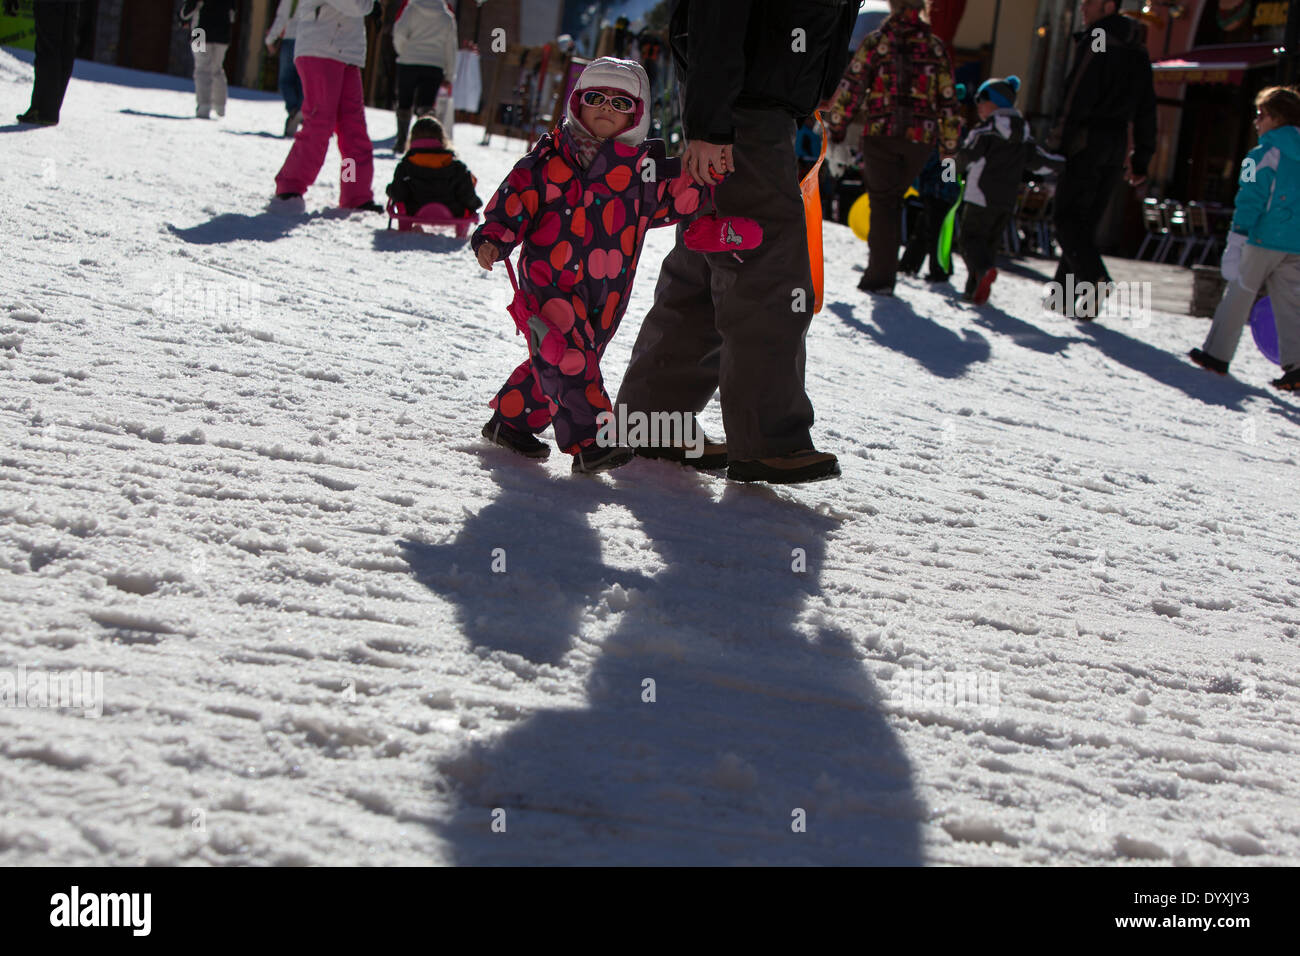 A young child dressed in a spotty all-in-one suit walks with an adult though a ski resort. Stock Photo